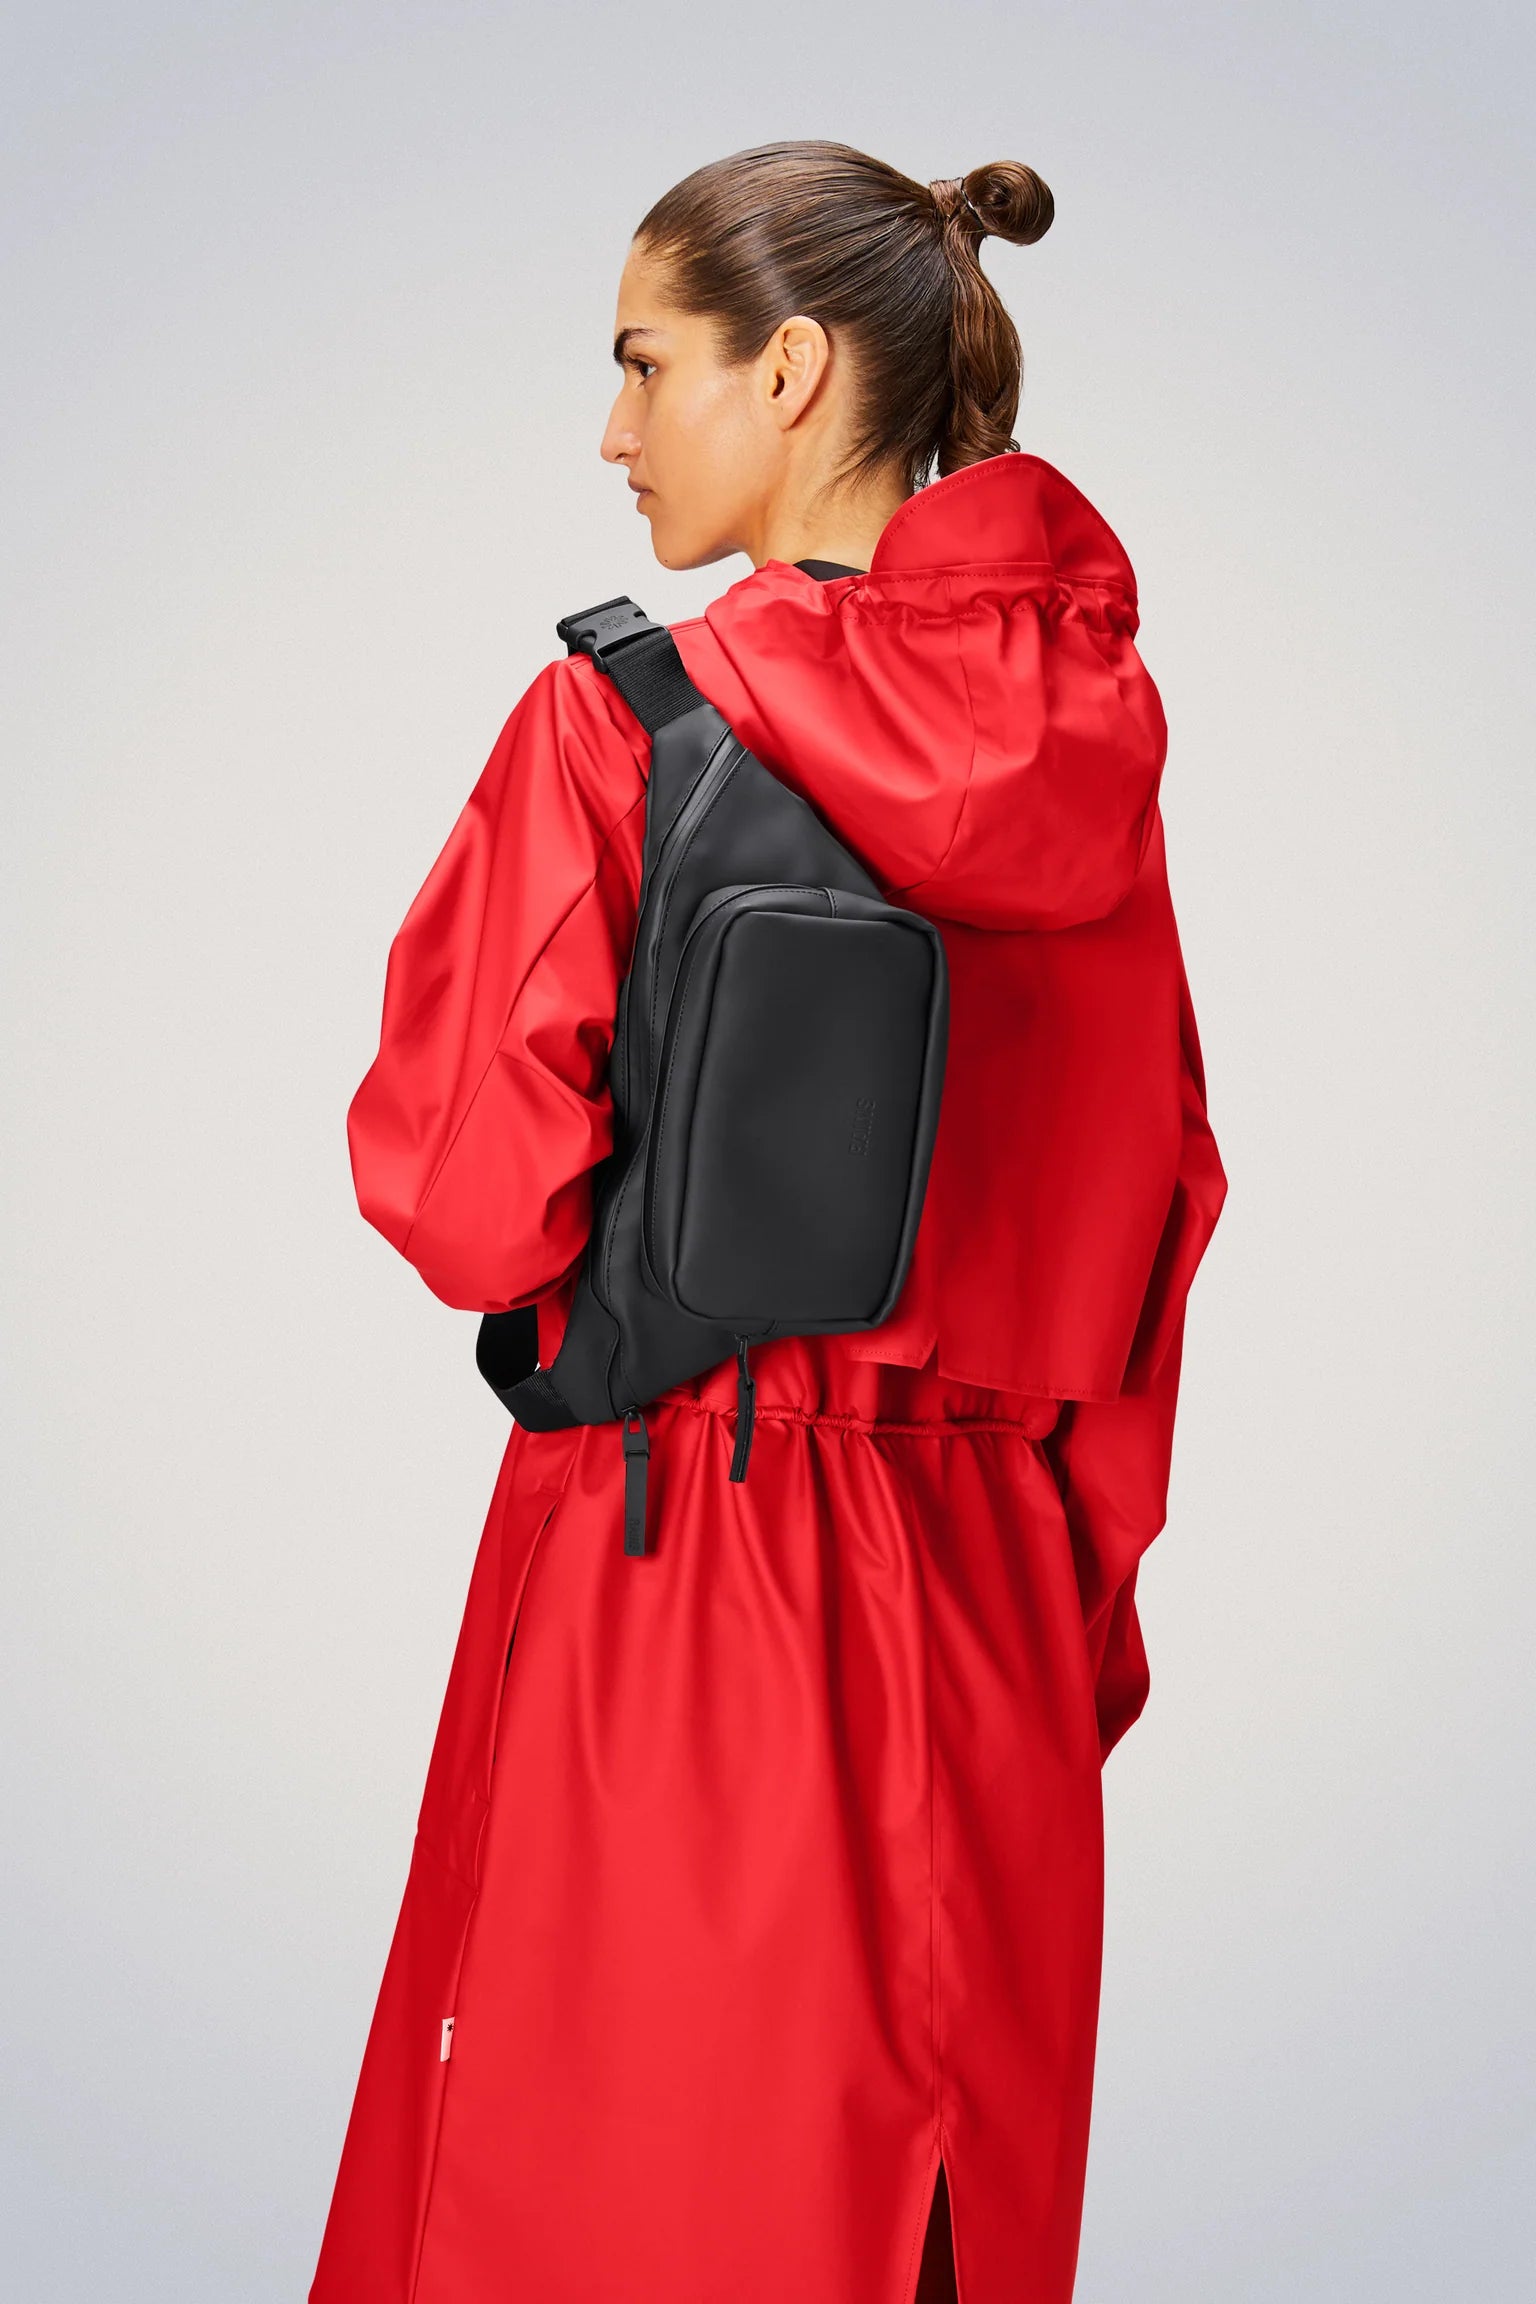 A woman wearing a red raincoat with a Rains Bum Bag - Black.